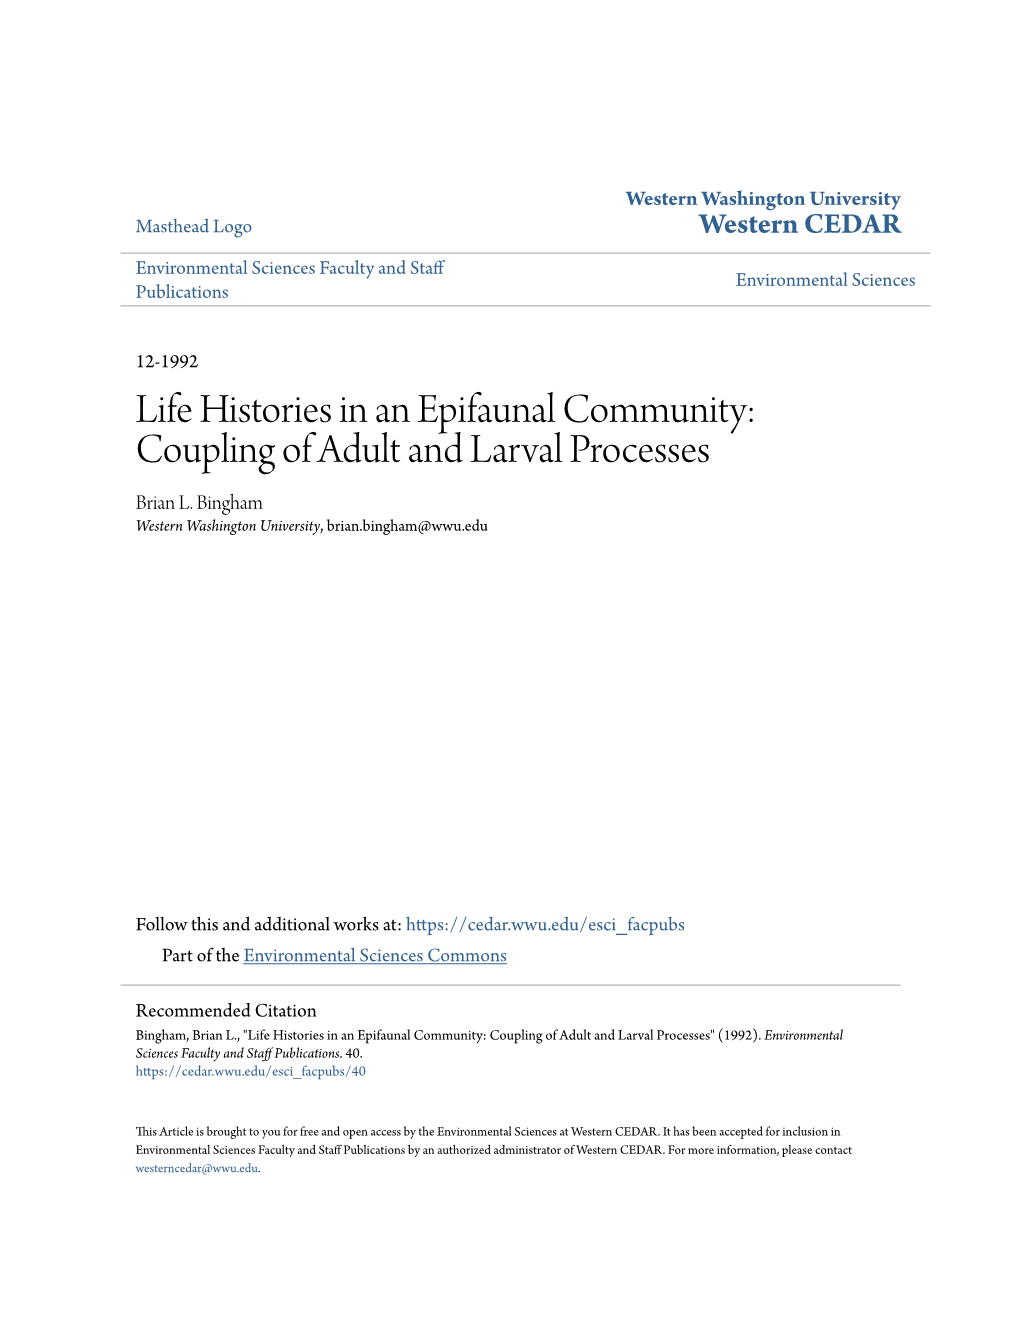 Life Histories in an Epifaunal Community: Coupling of Adult and Larval Processes Brian L